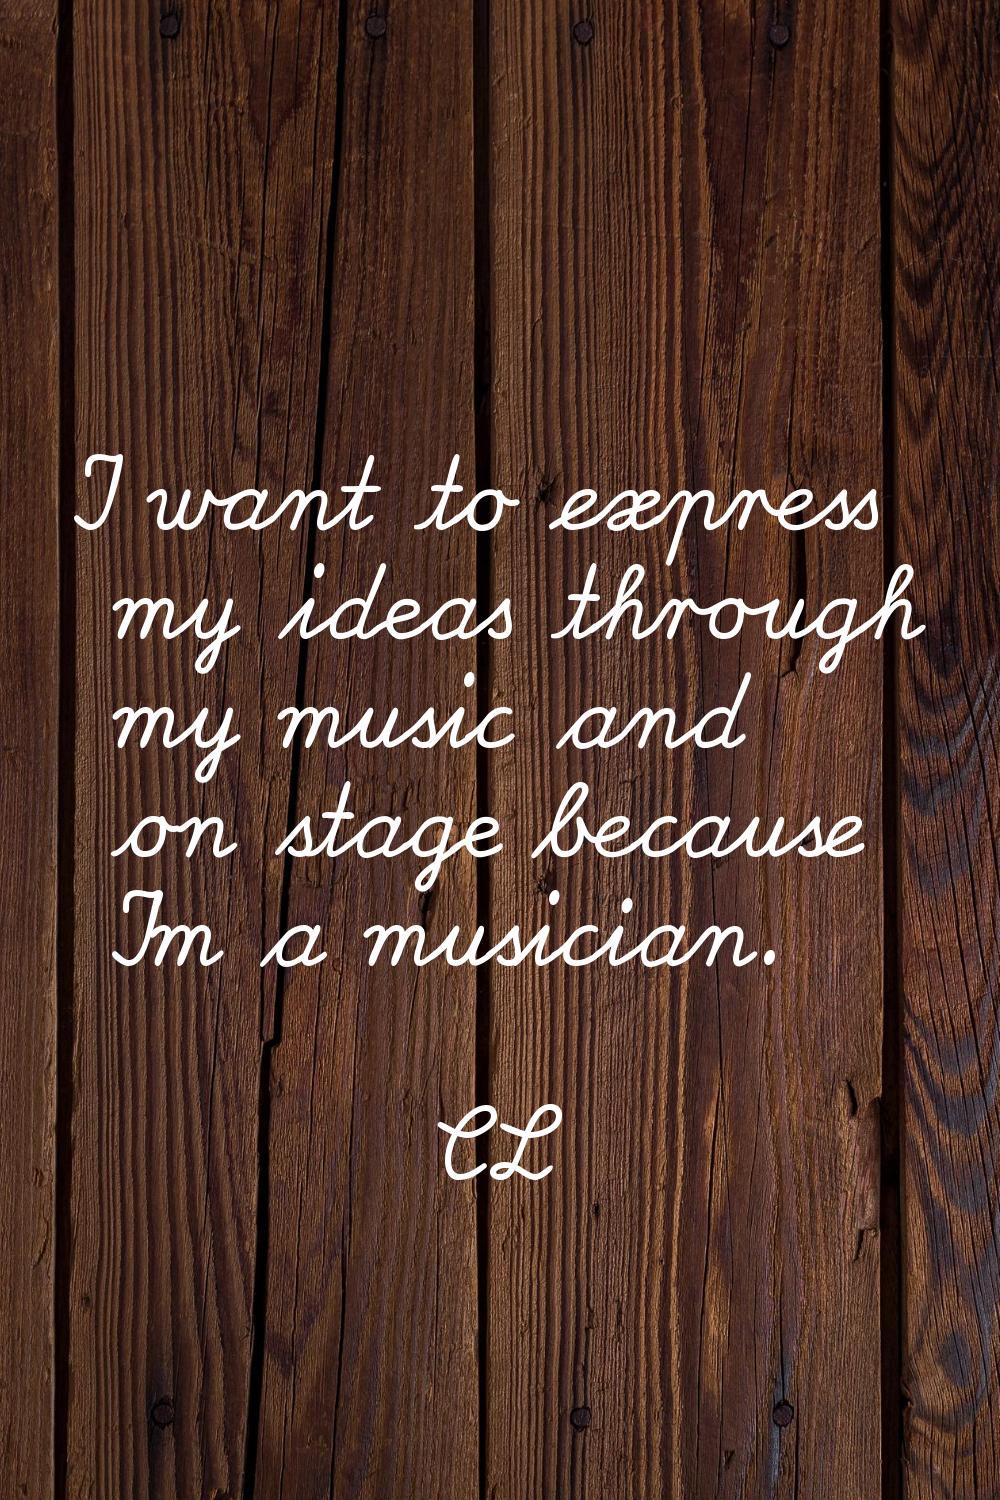 I want to express my ideas through my music and on stage because I'm a musician.